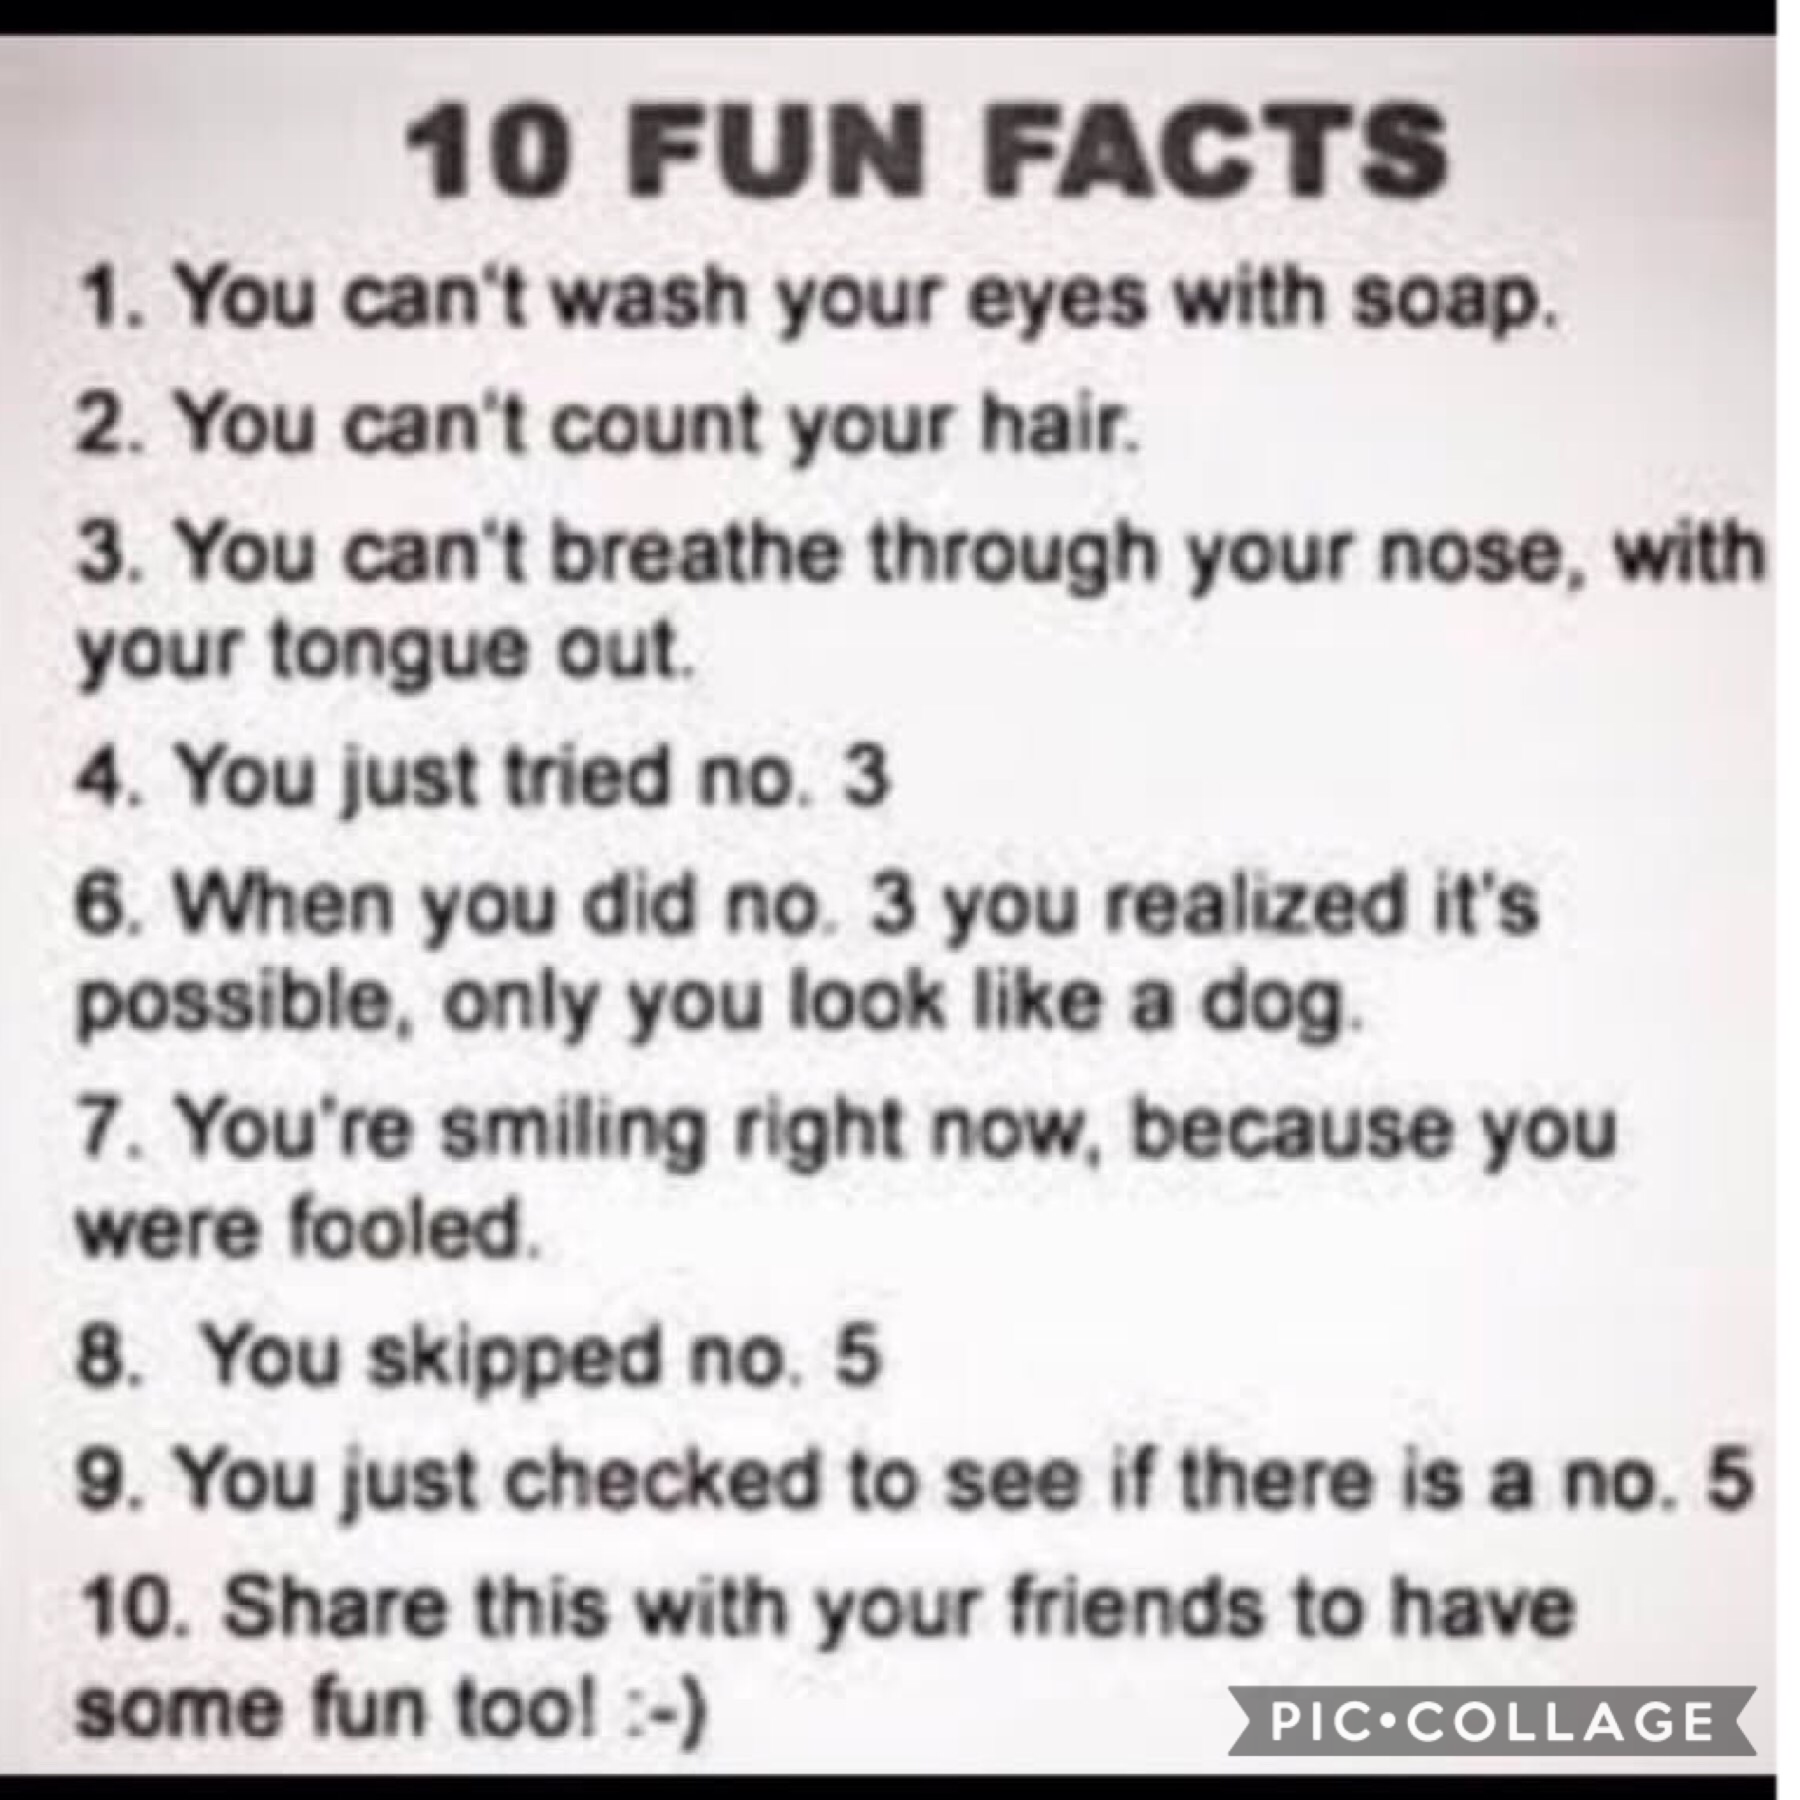 This is so funny🤣 comment if you tried it